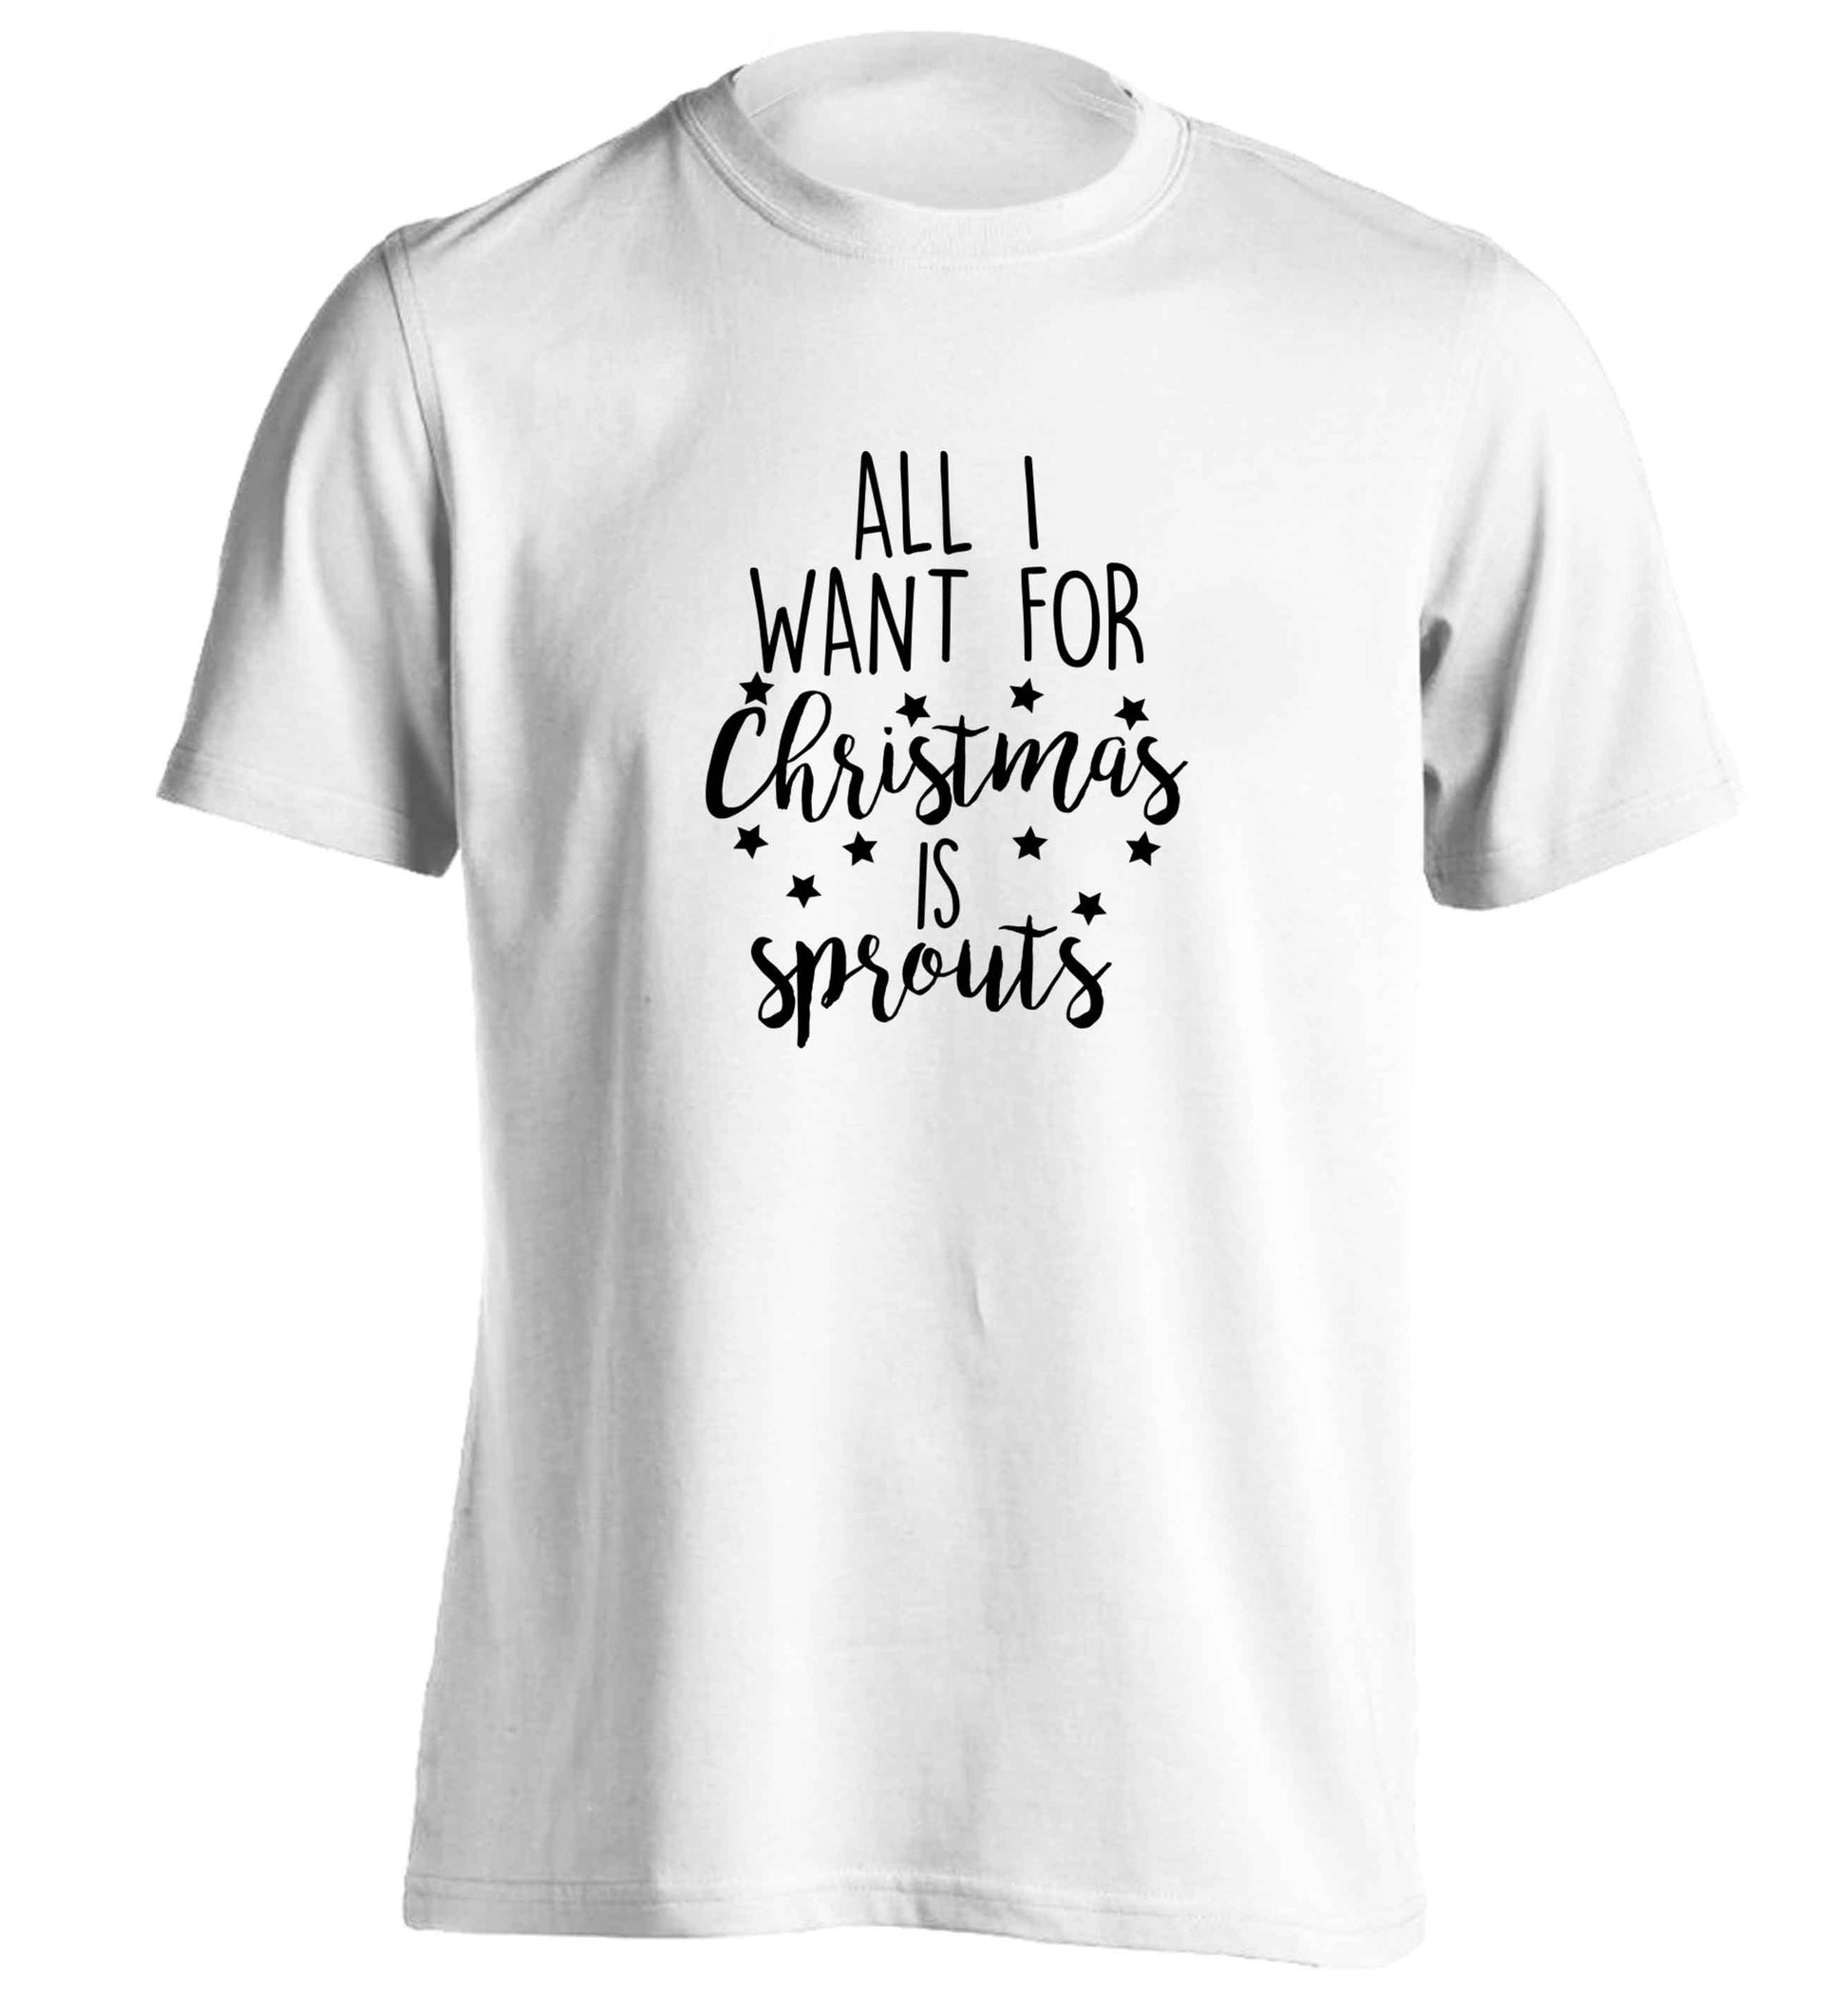 All I want for Christmas is sprouts adults unisex white Tshirt 2XL